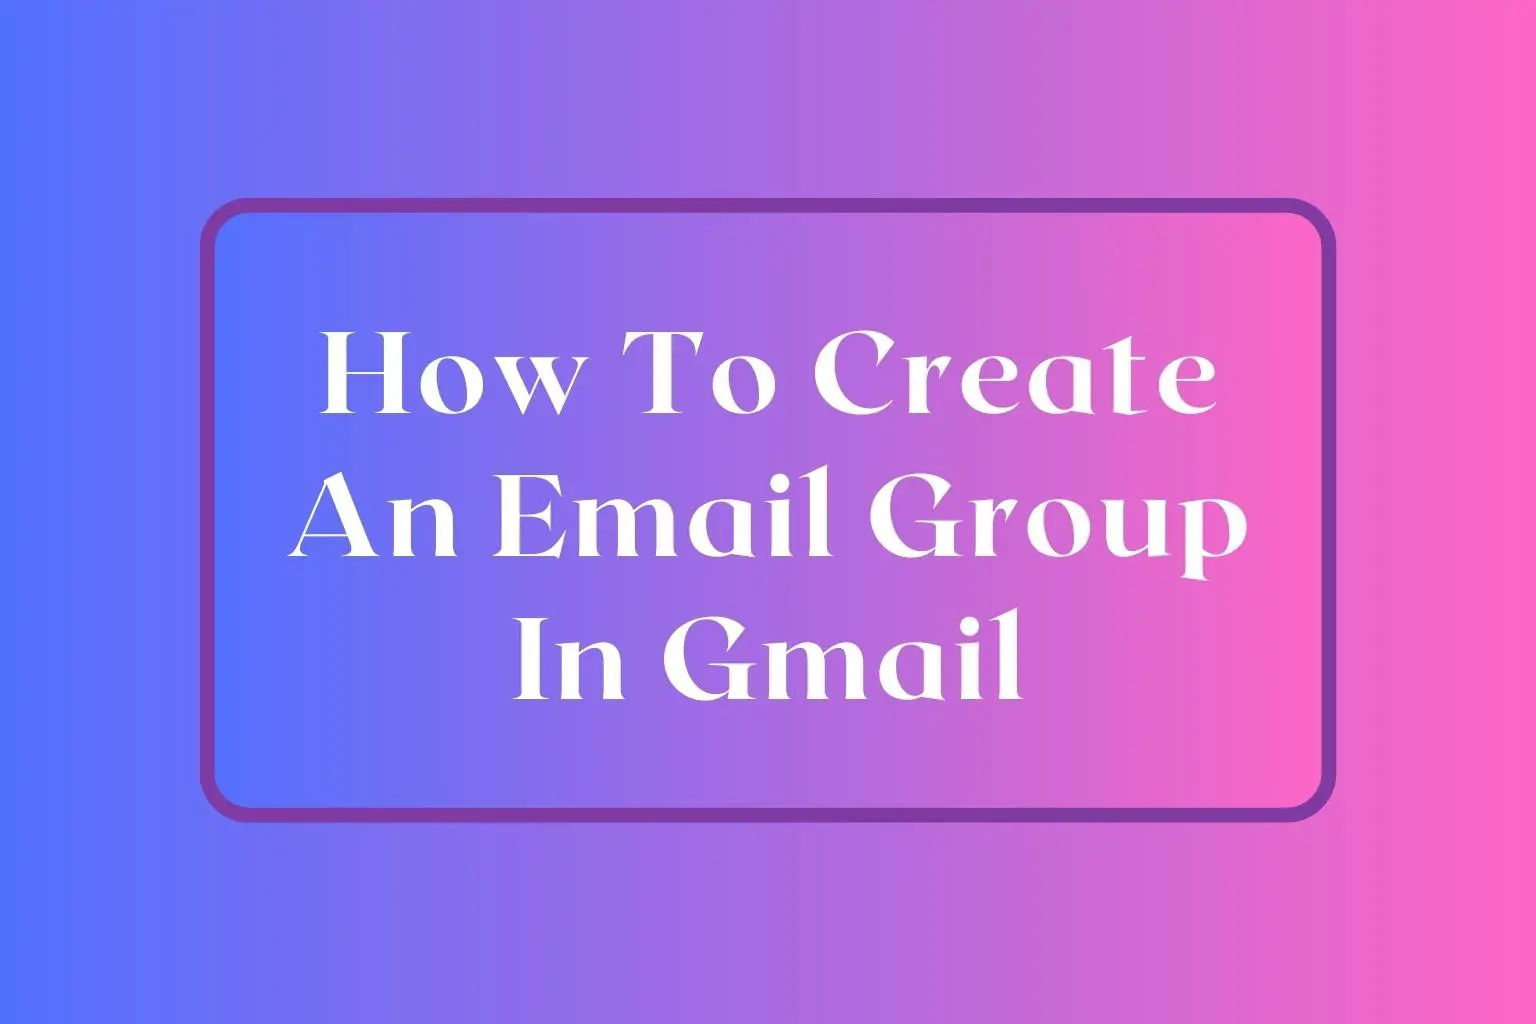 How To Create An Email Group In Gmail